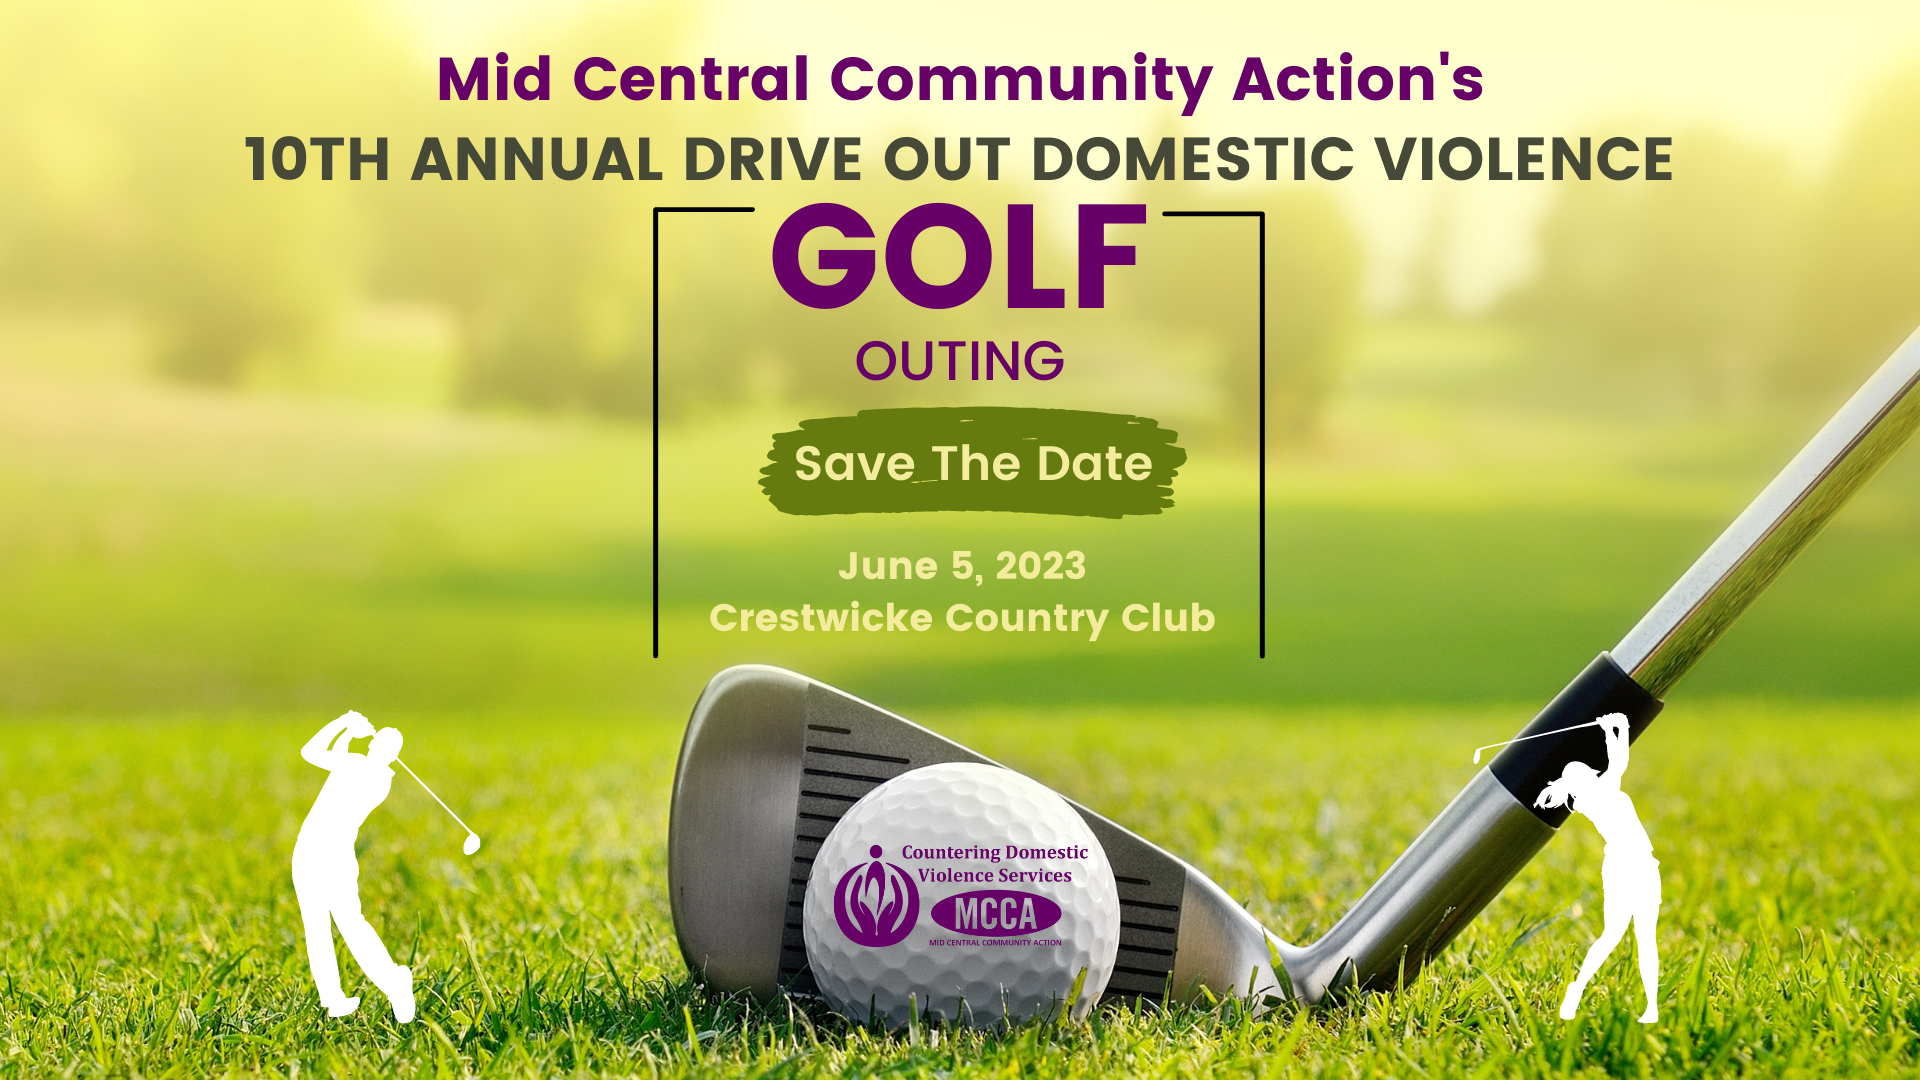 2023 Drive Out Domestic Violence Golf Outing